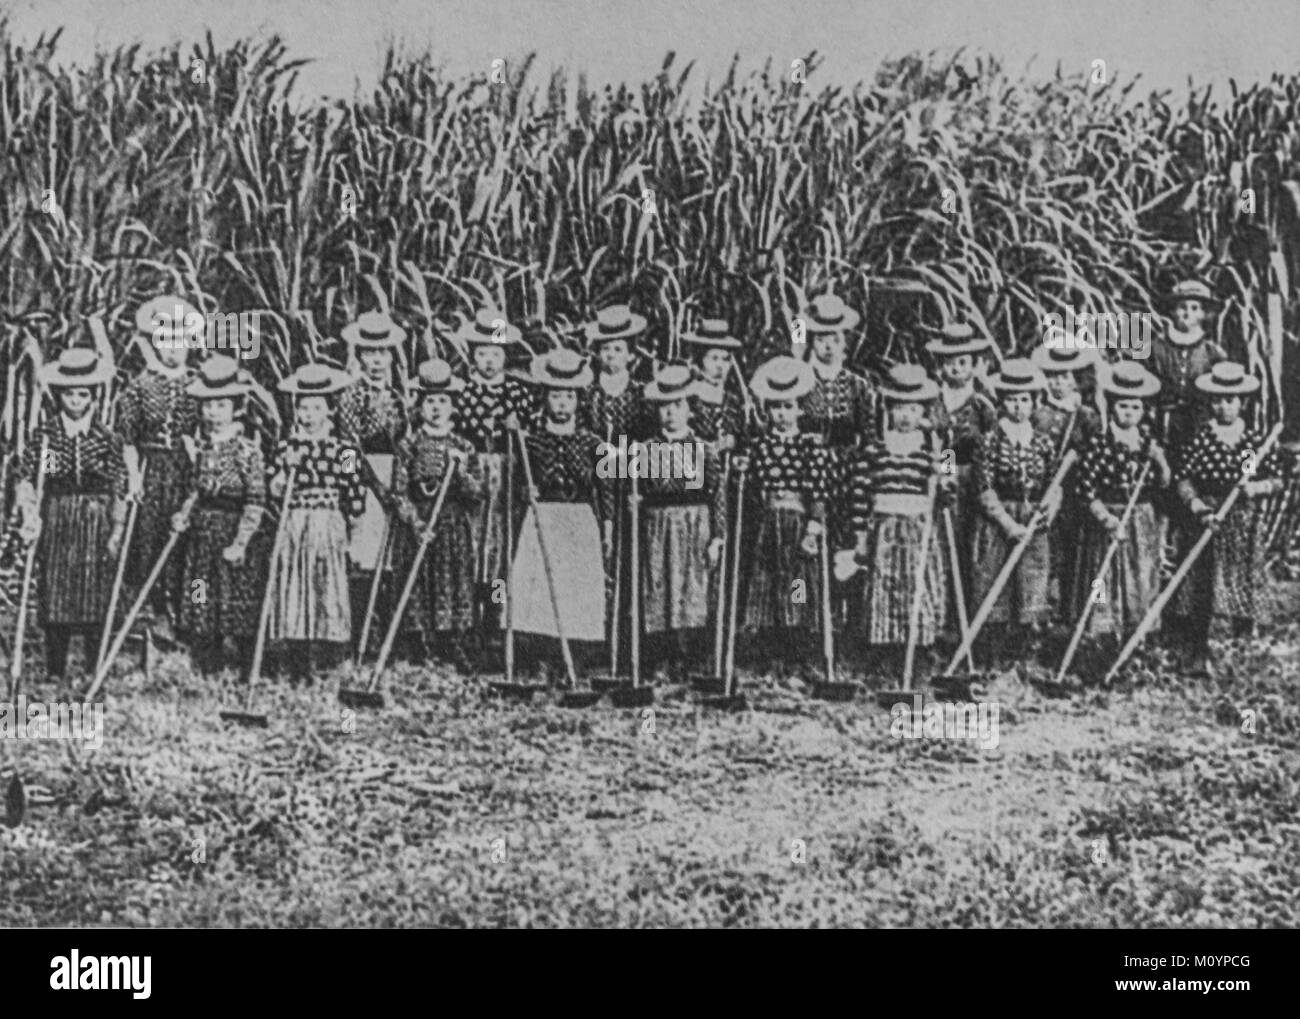 Japanese immigrants workers at sugarcane field in Hawaii c 1885. Stock Photo